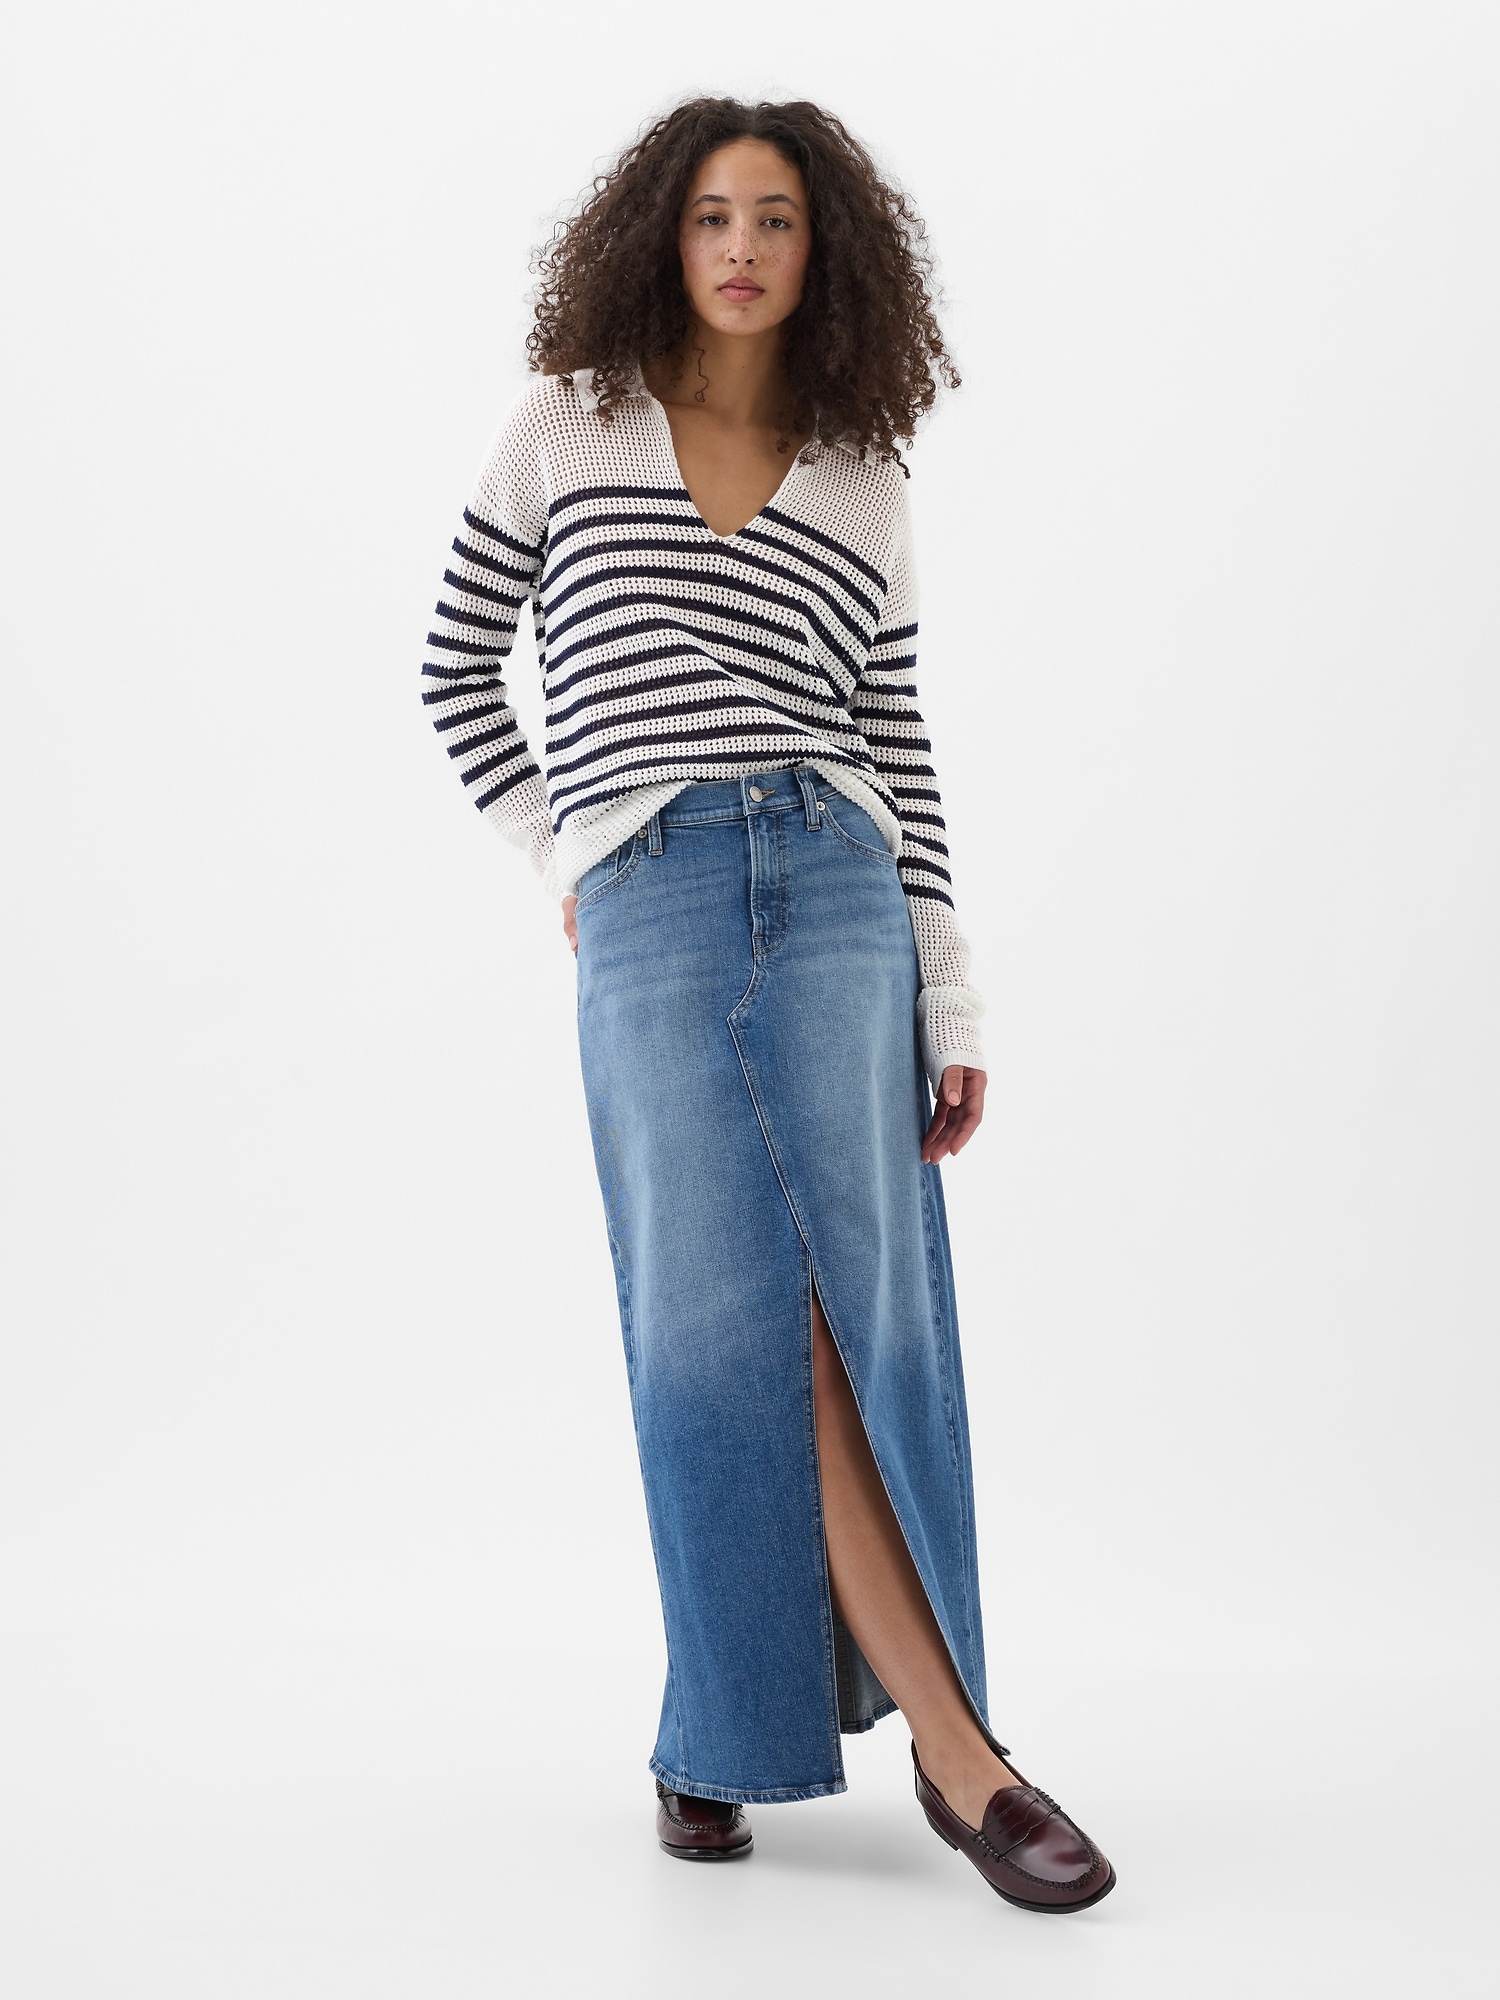 Casual Chic with Gap Long Denim Skirt